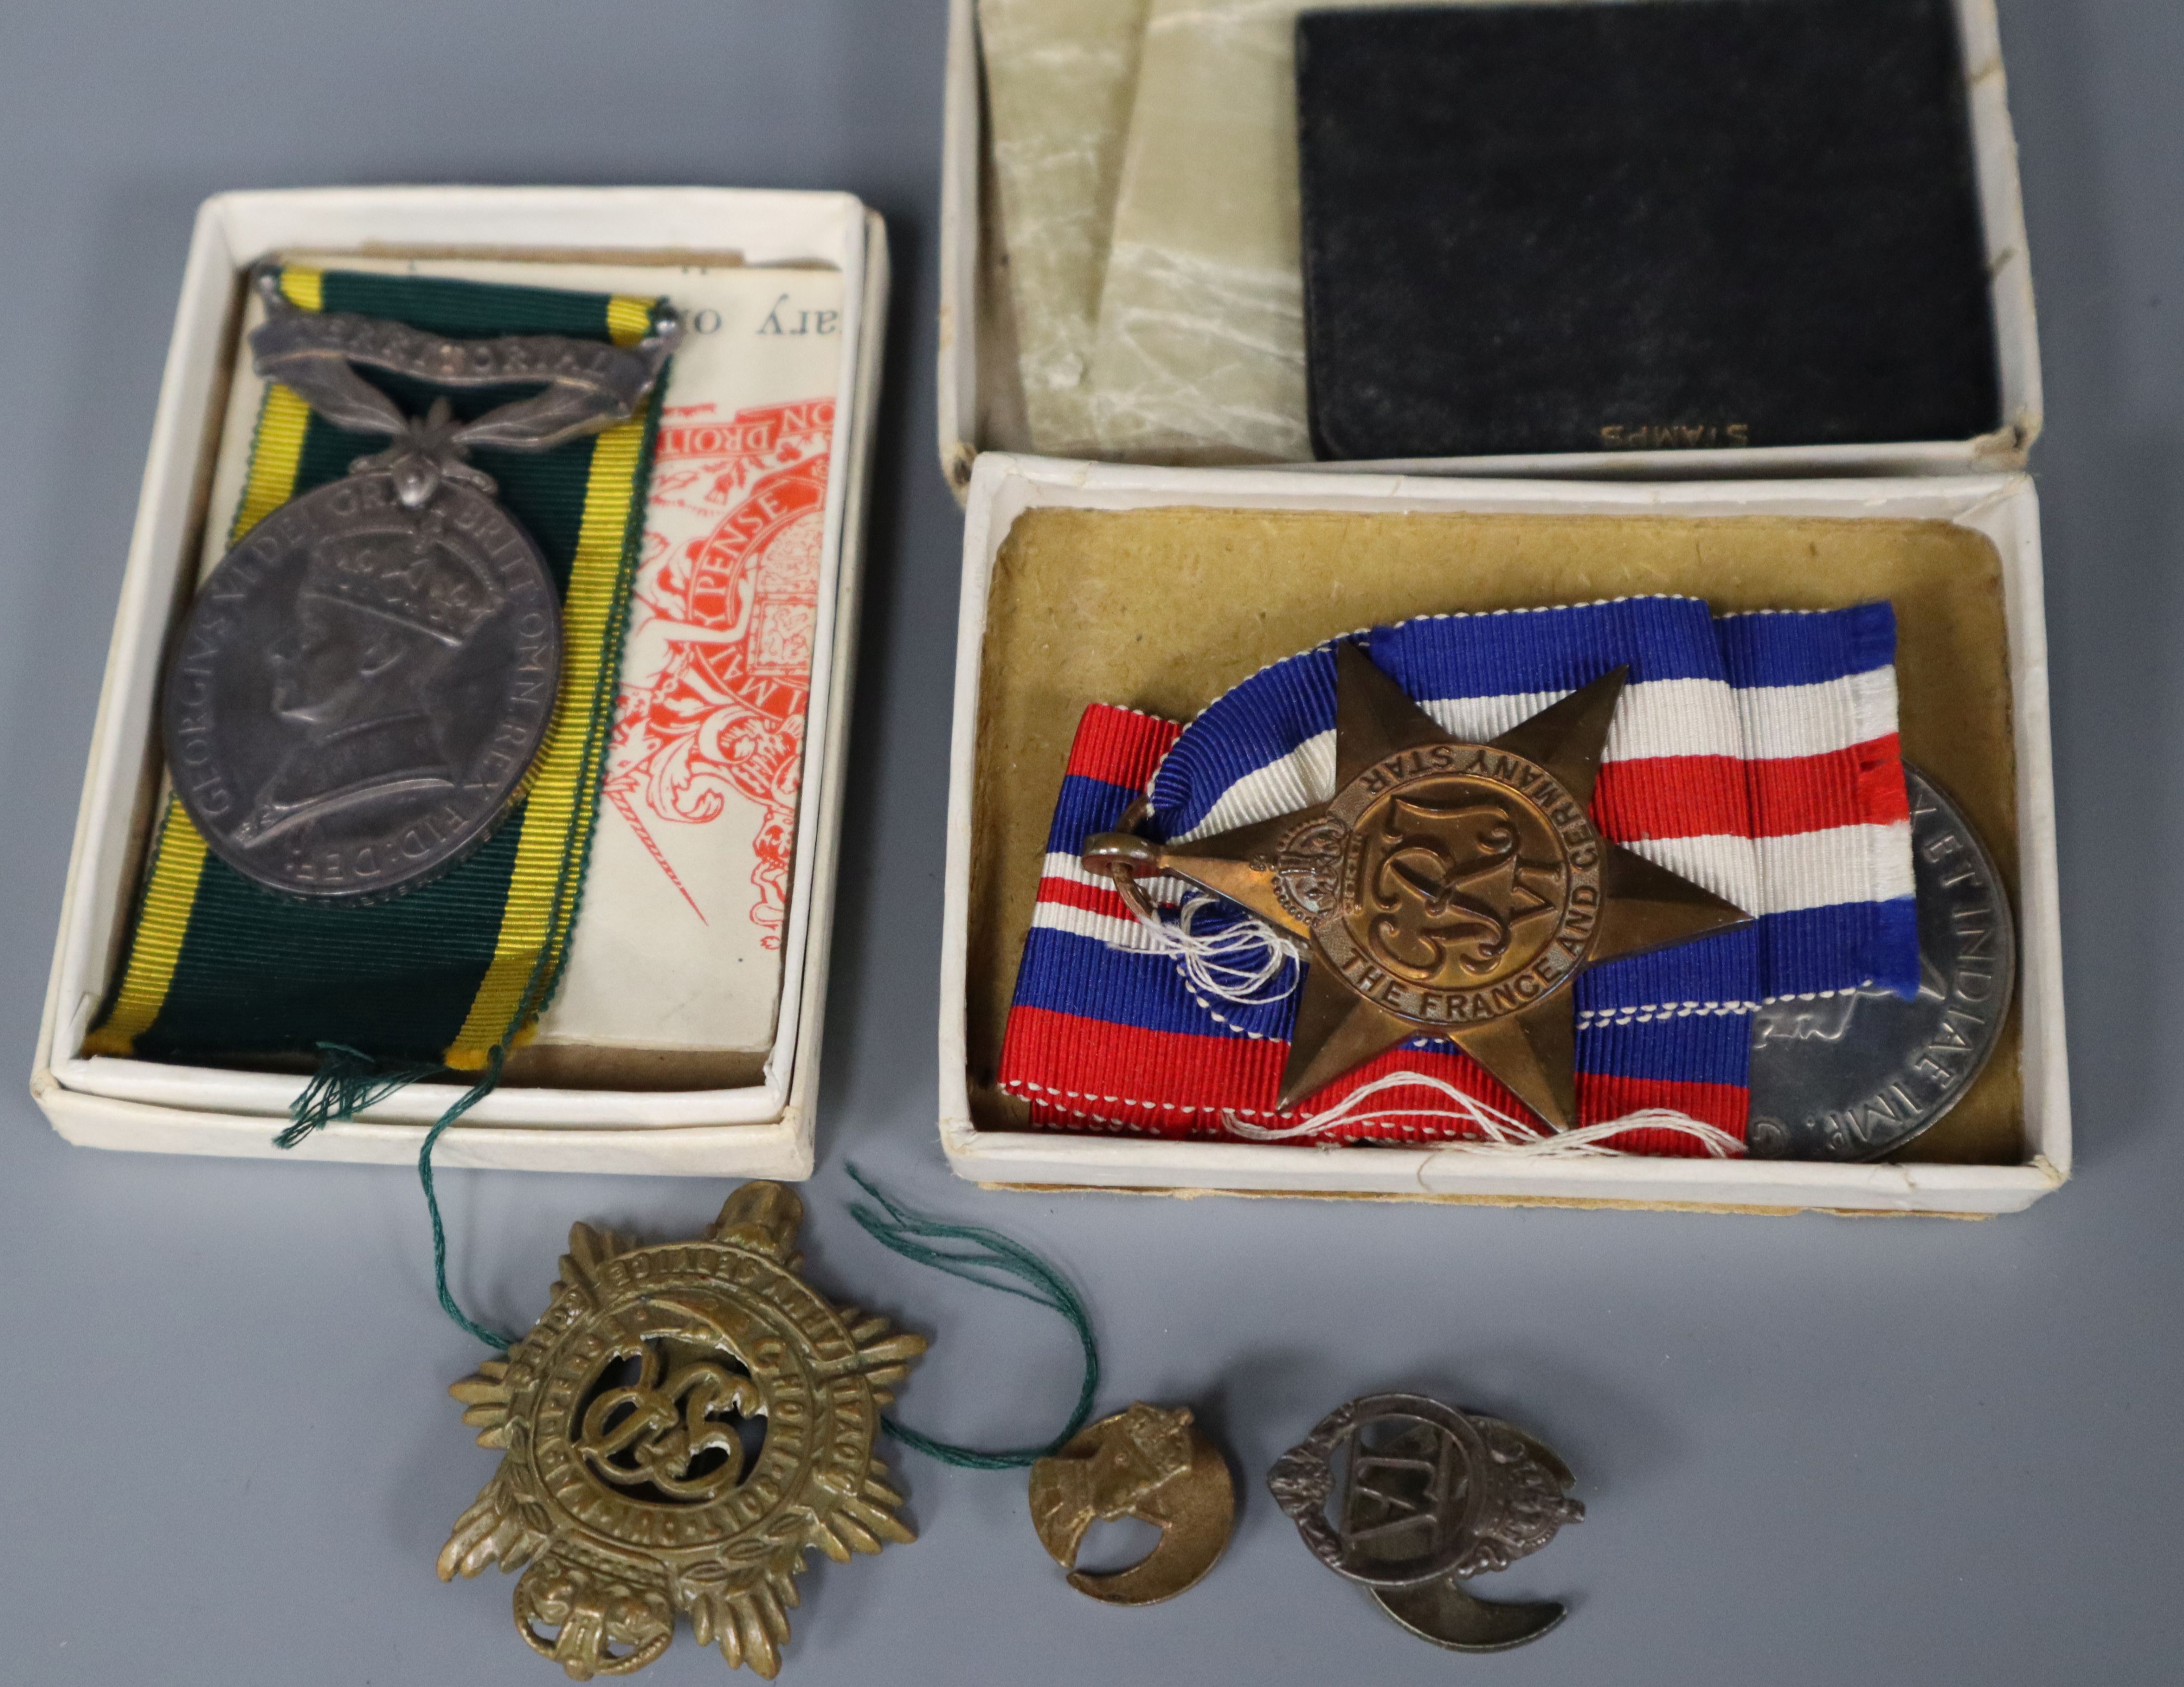 A Territorial Fox Efficiency medal, two WW2 medals and badges etc